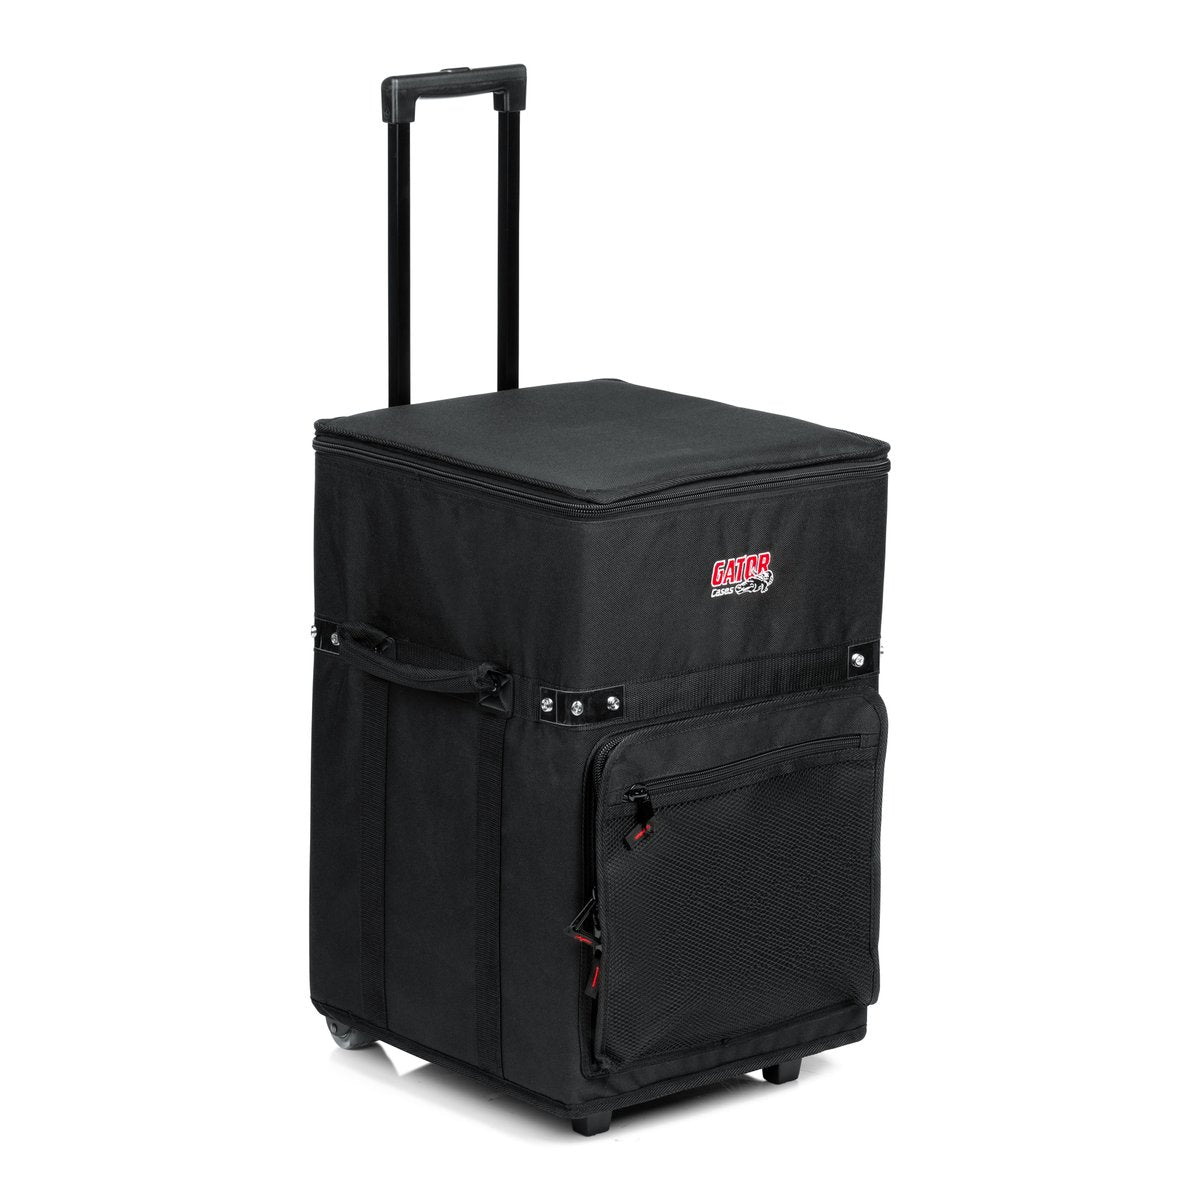 Cargo Case w/ Lift-Out Tray, Wheels, Retractable Handle; 13.5"X12.75"X14" Int.